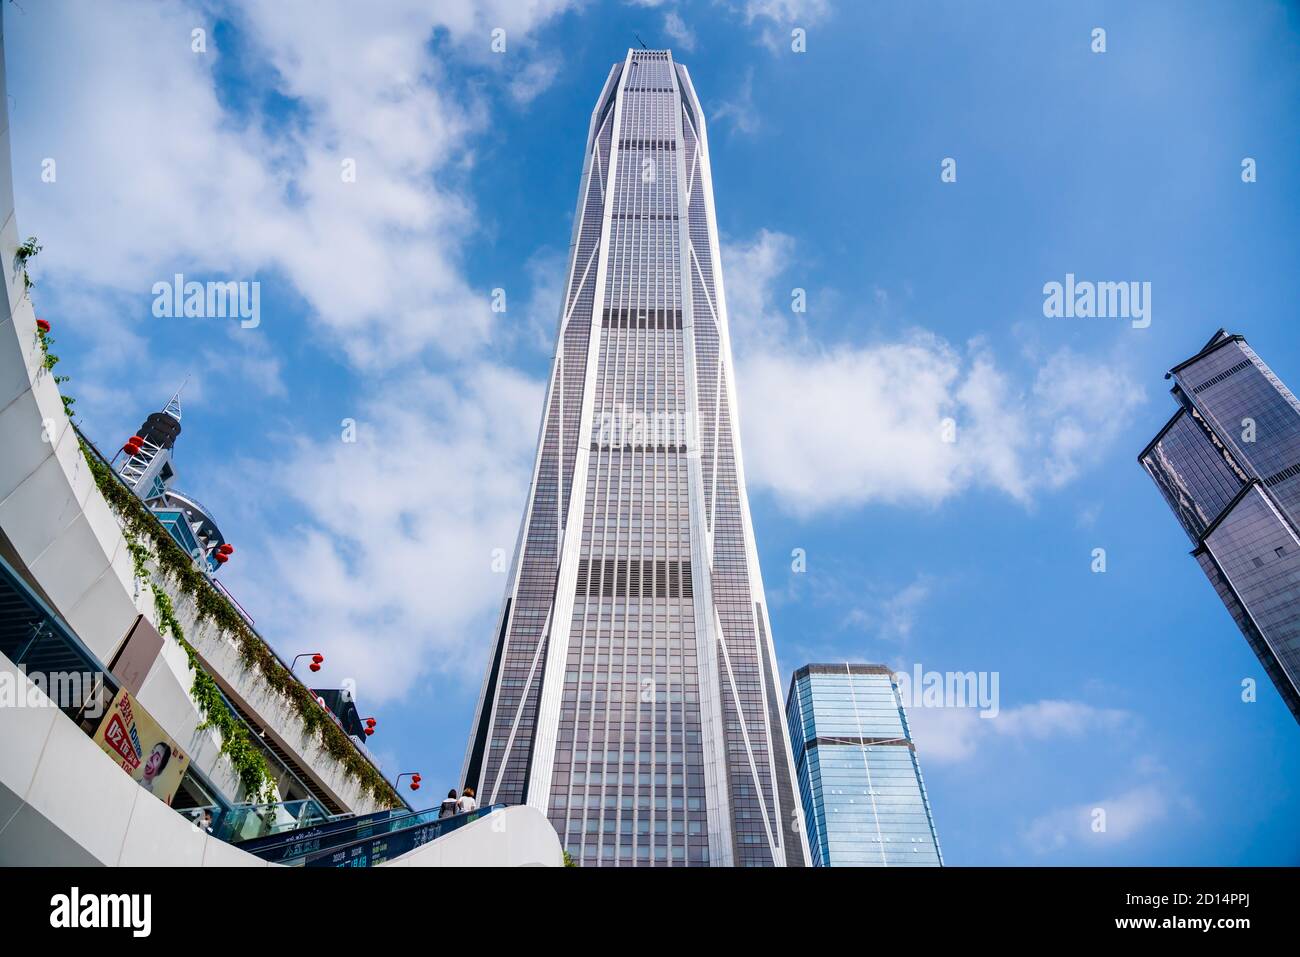 View of Ping An Finance Centre, tallest skyscraper in Shenzhen Stock Photo  - Alamy